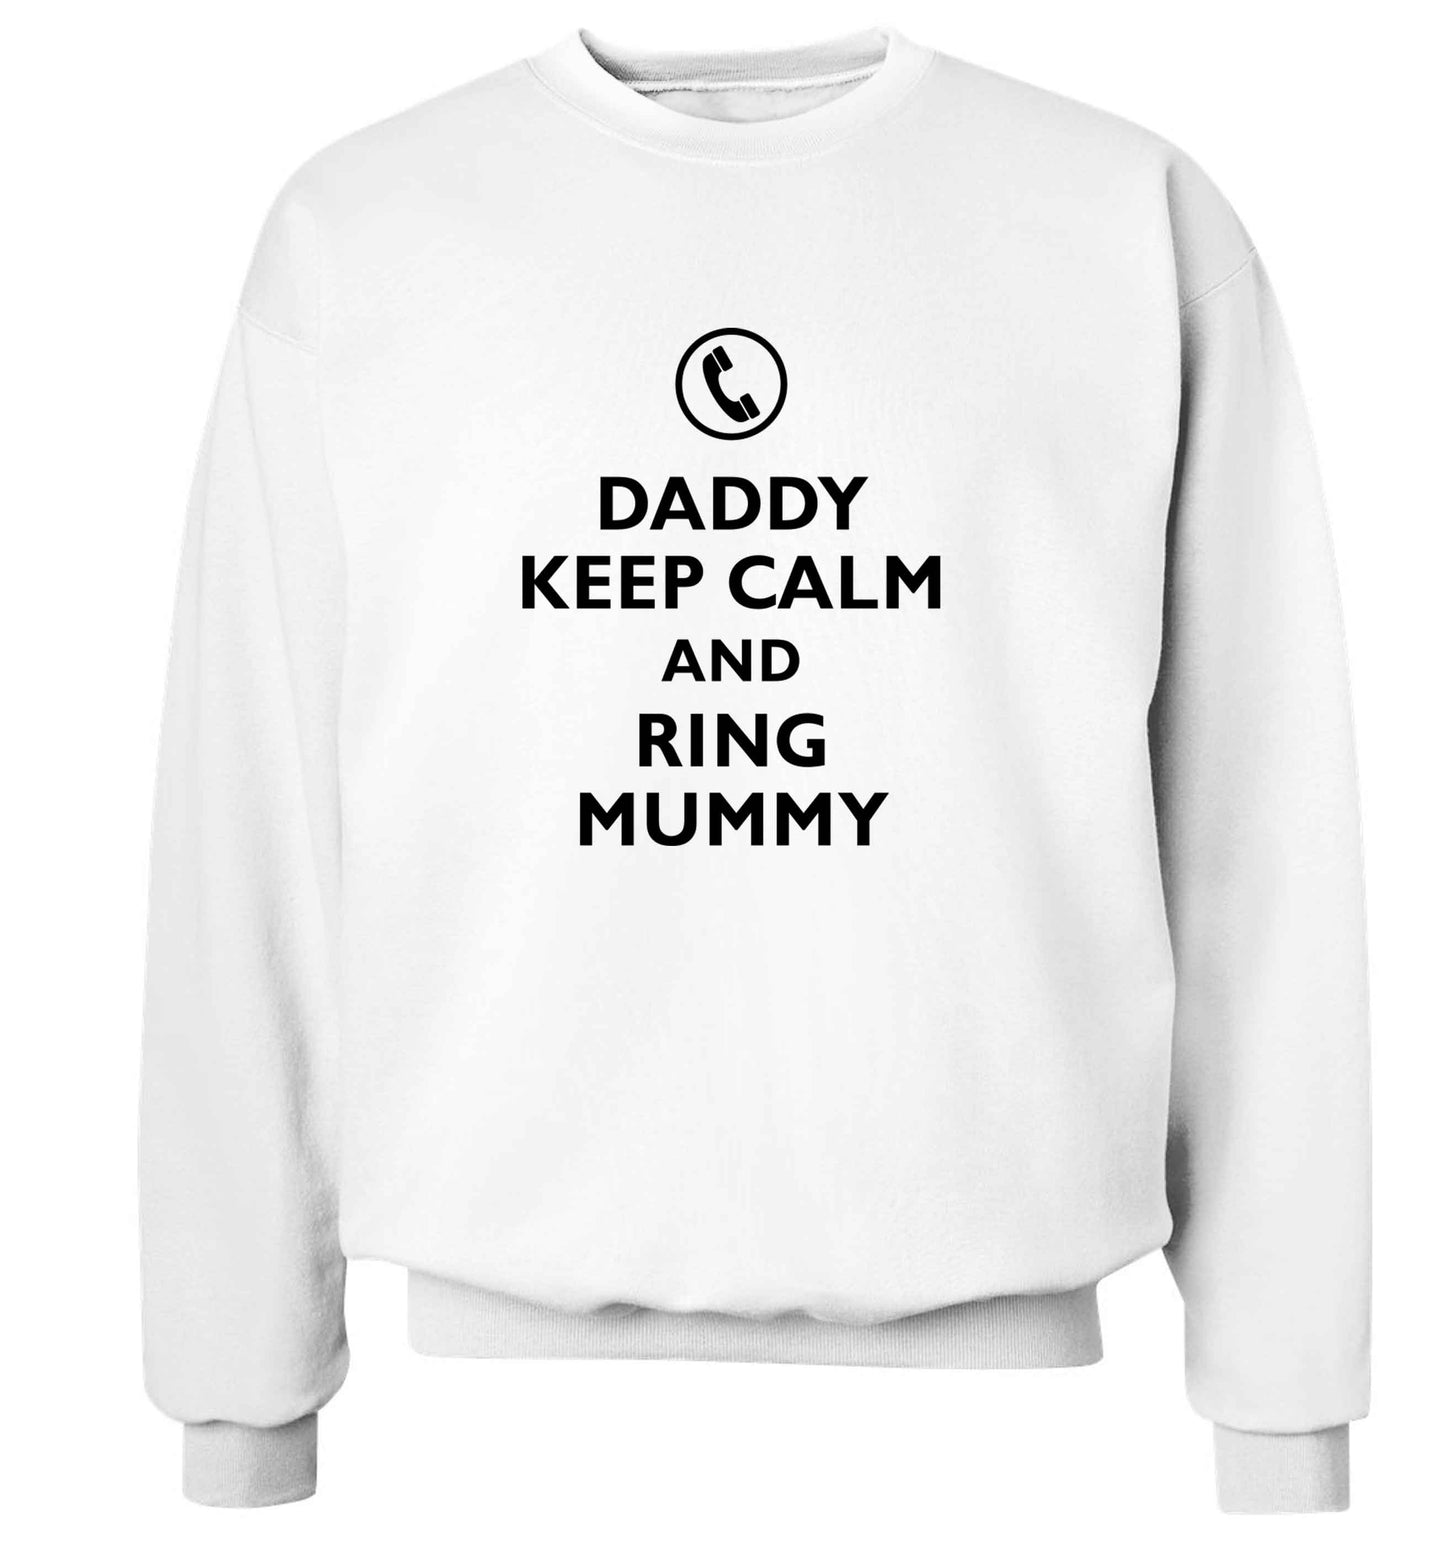 Daddy keep calm and ring mummy adult's unisex white sweater 2XL